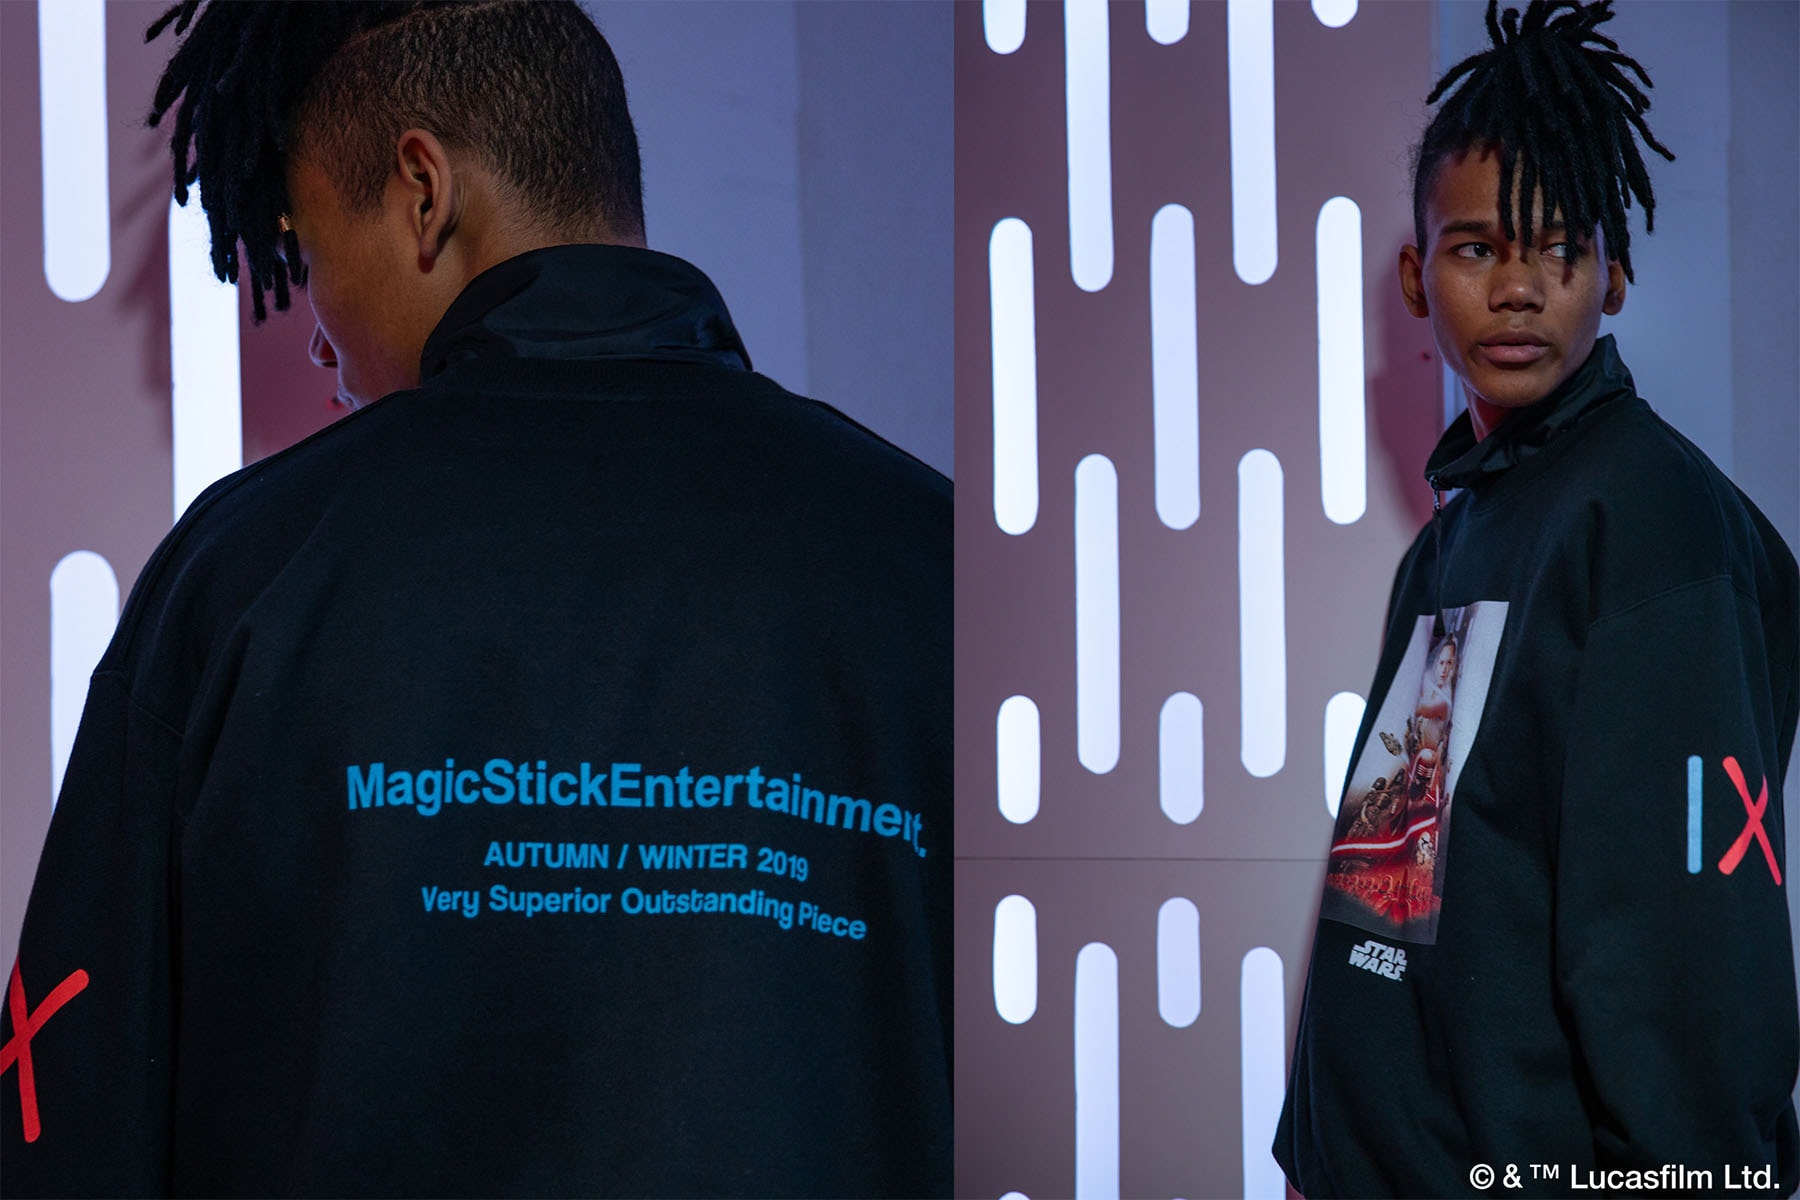 Star Wars x Magic Stick 'Rise of Skywalker' Collection First Order Black Hoodies Lucasfilm